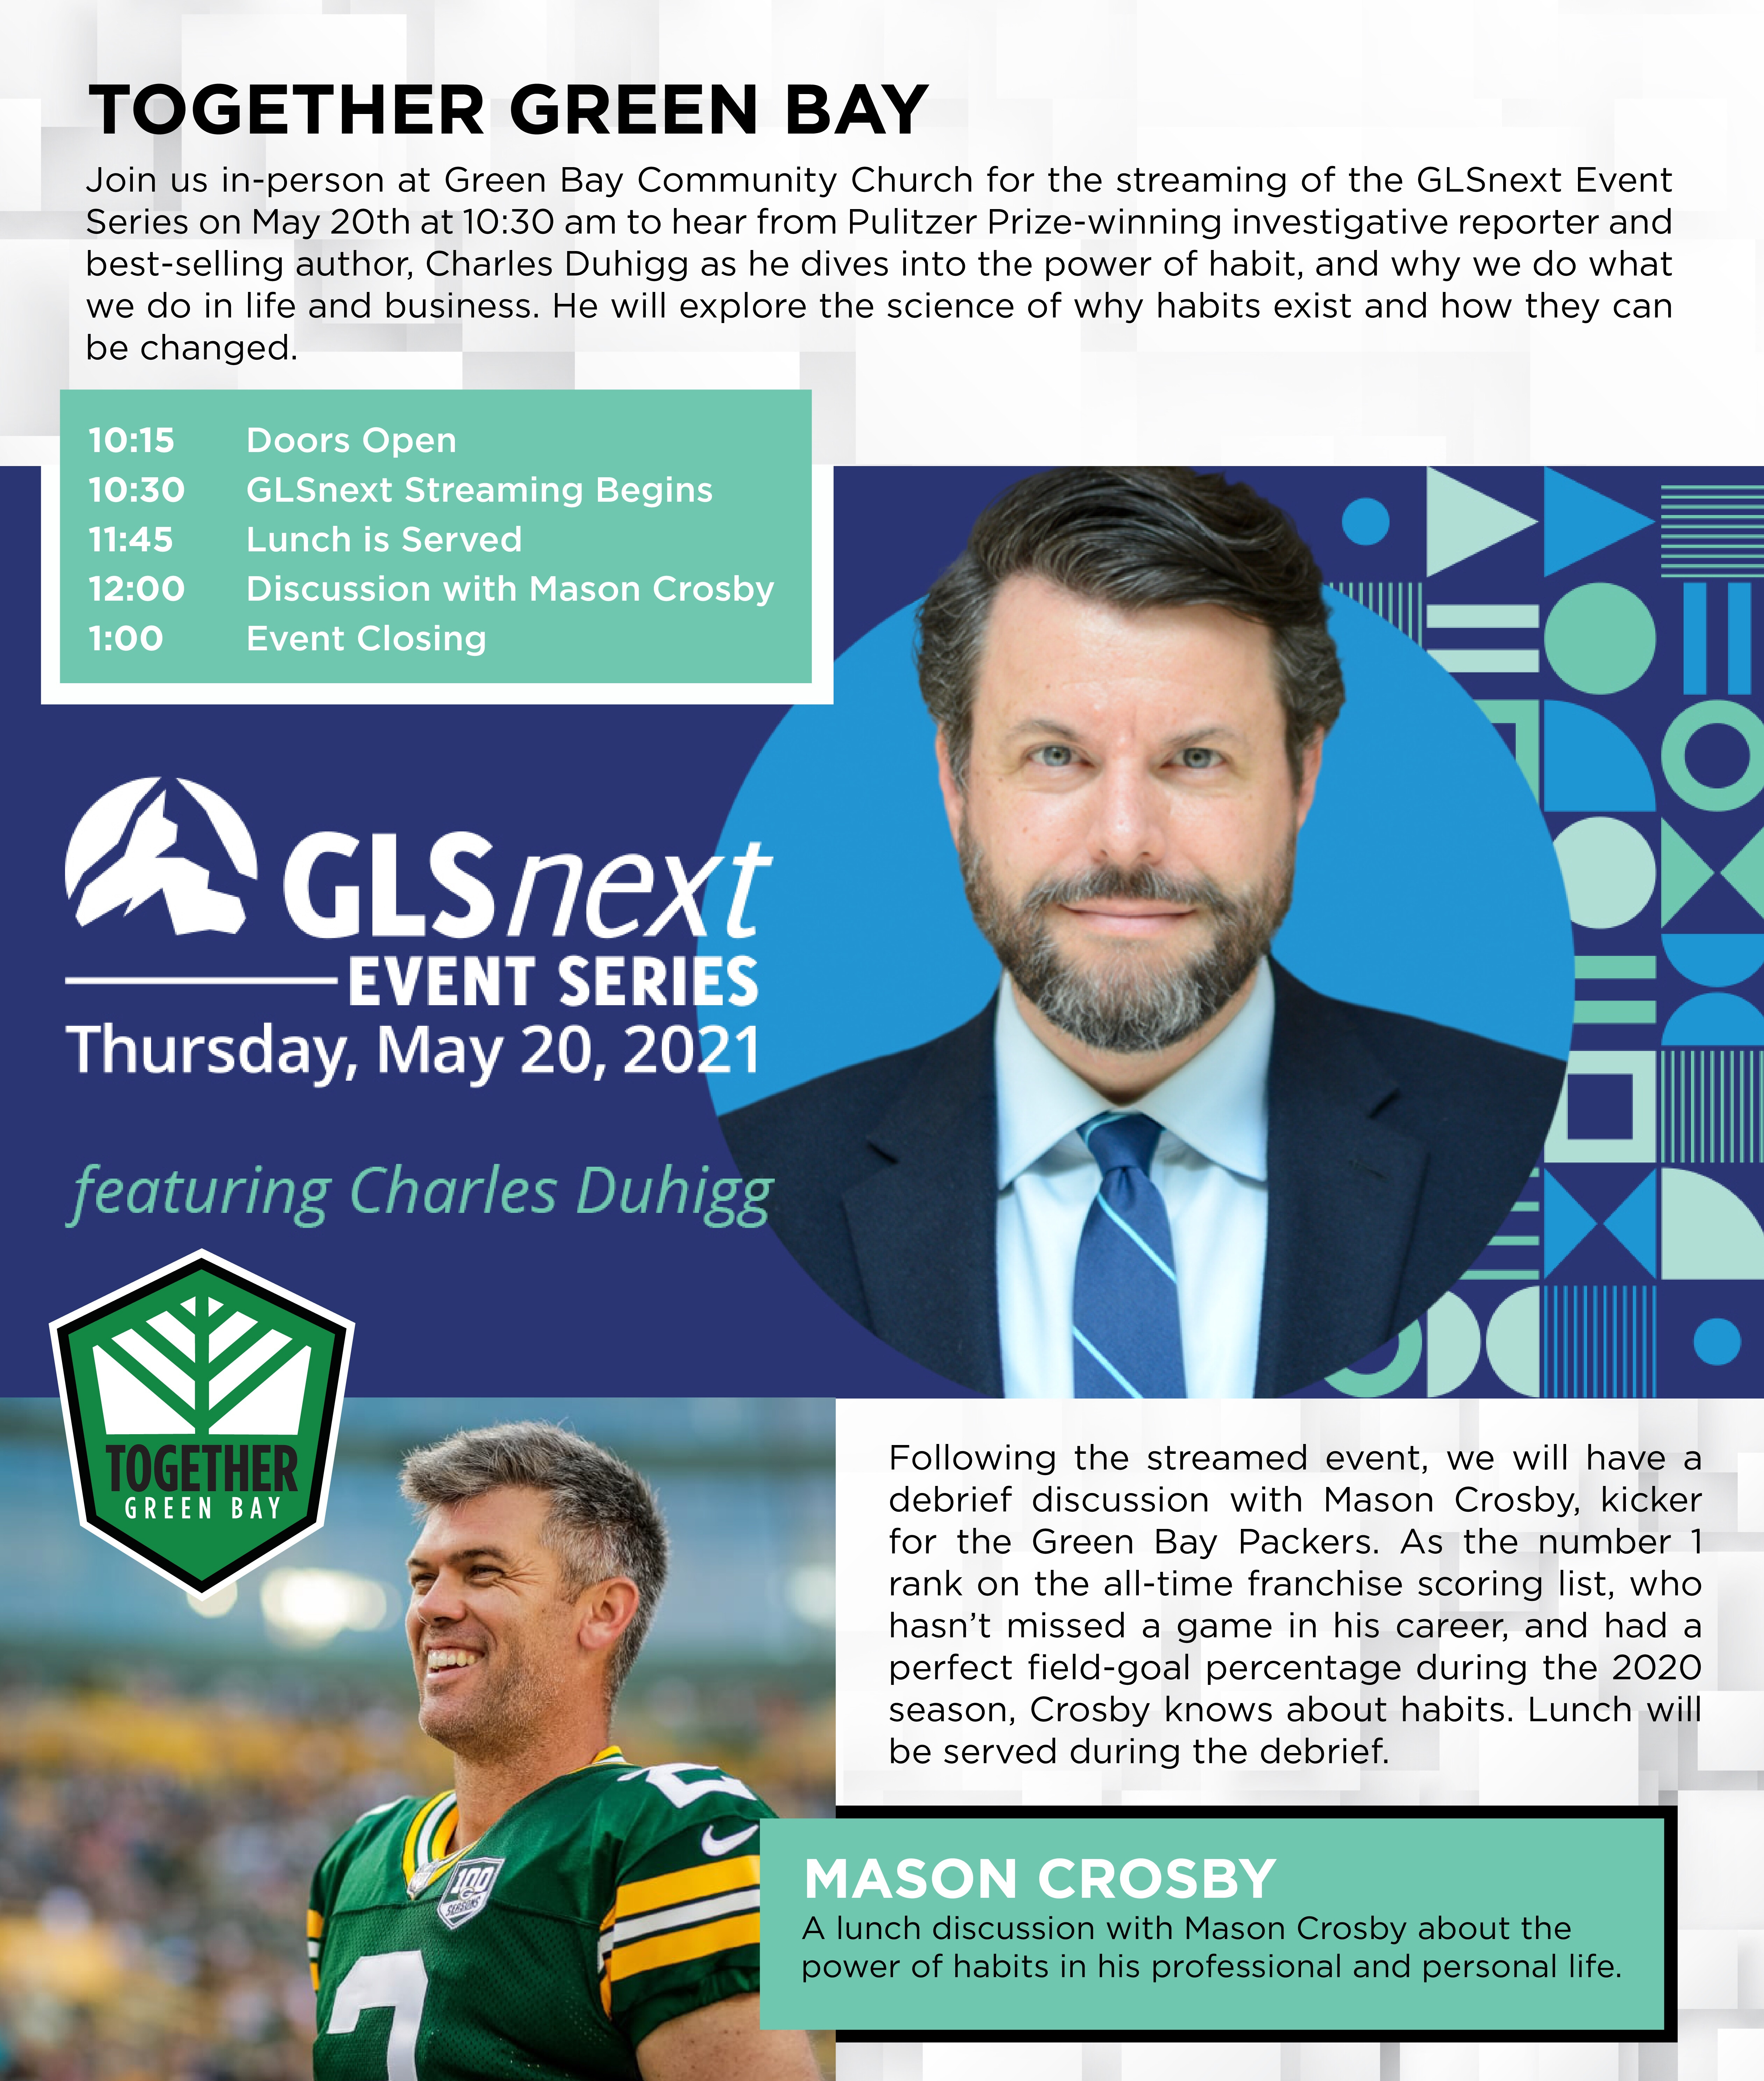 GLSnext featuring Charles Duhigg and Mason Crosby